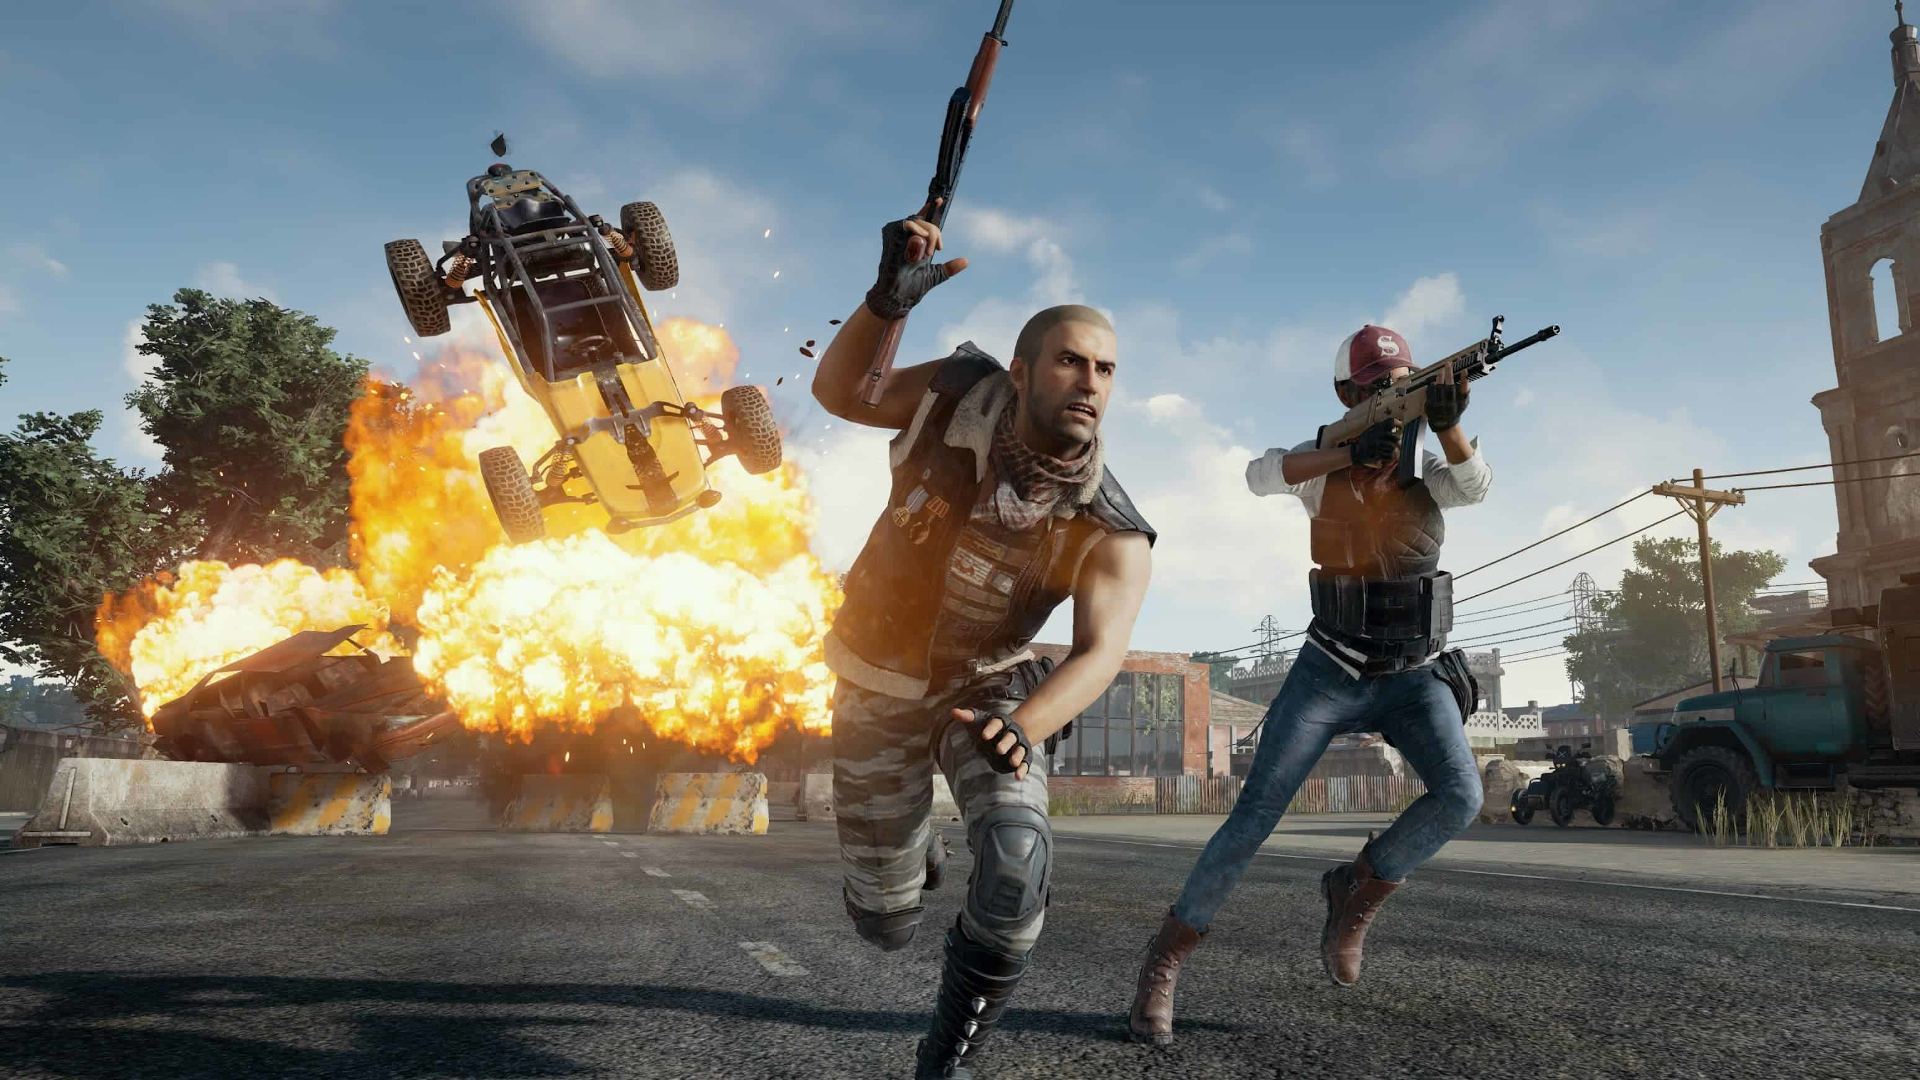  The Taliban is banning PUBG for being too violent 